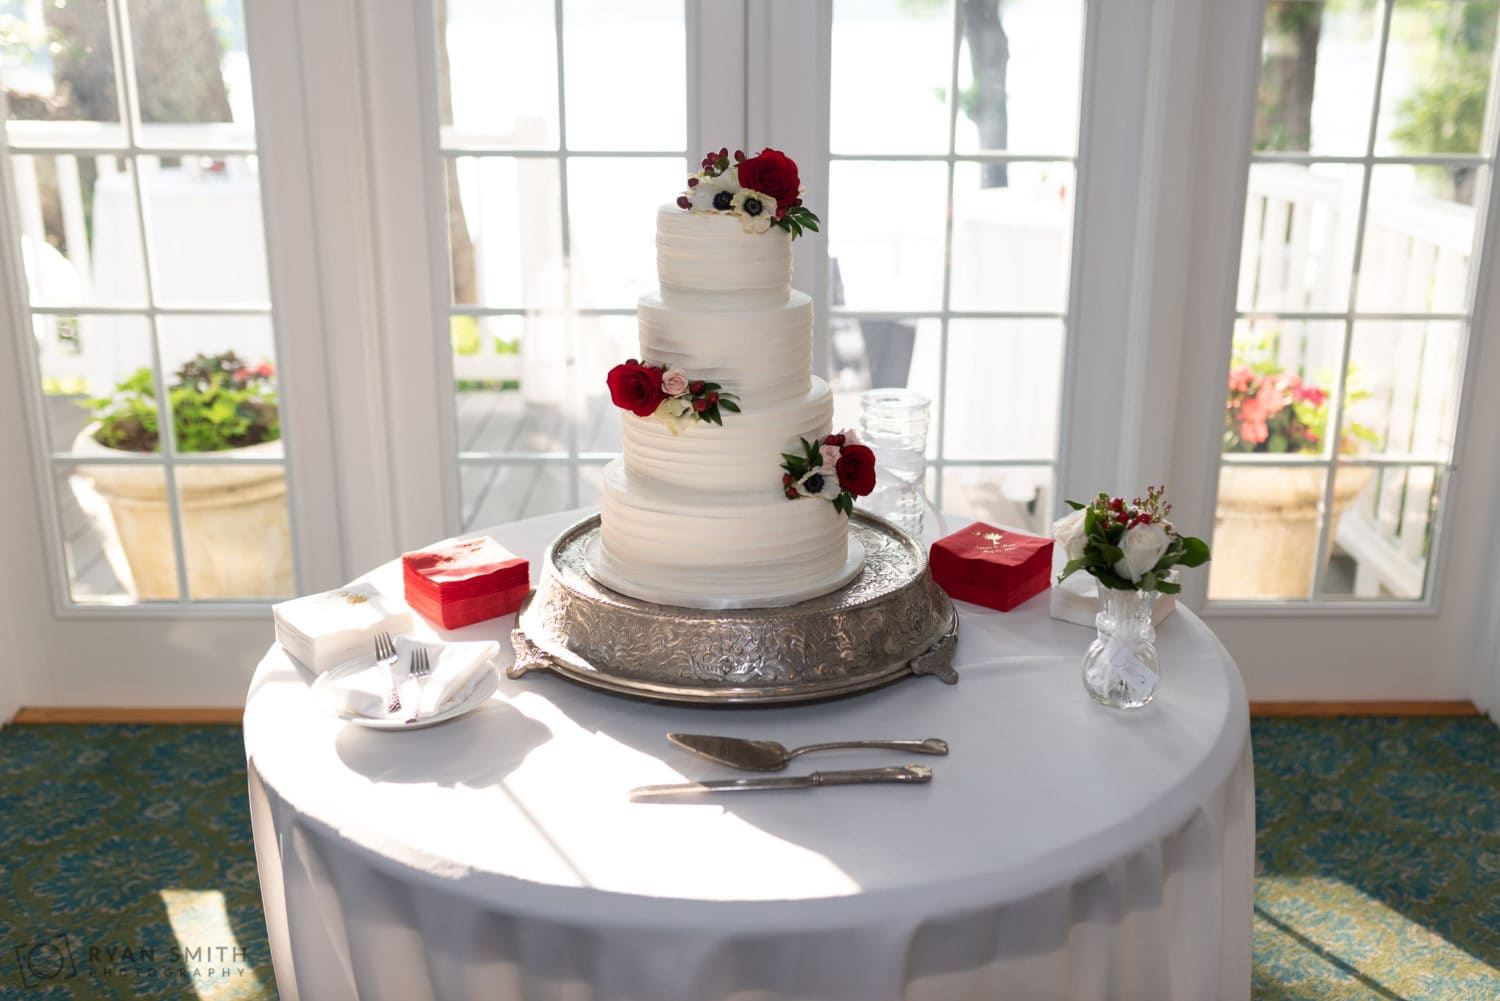 Pictures of the wedding cake Wachesaw Plantation